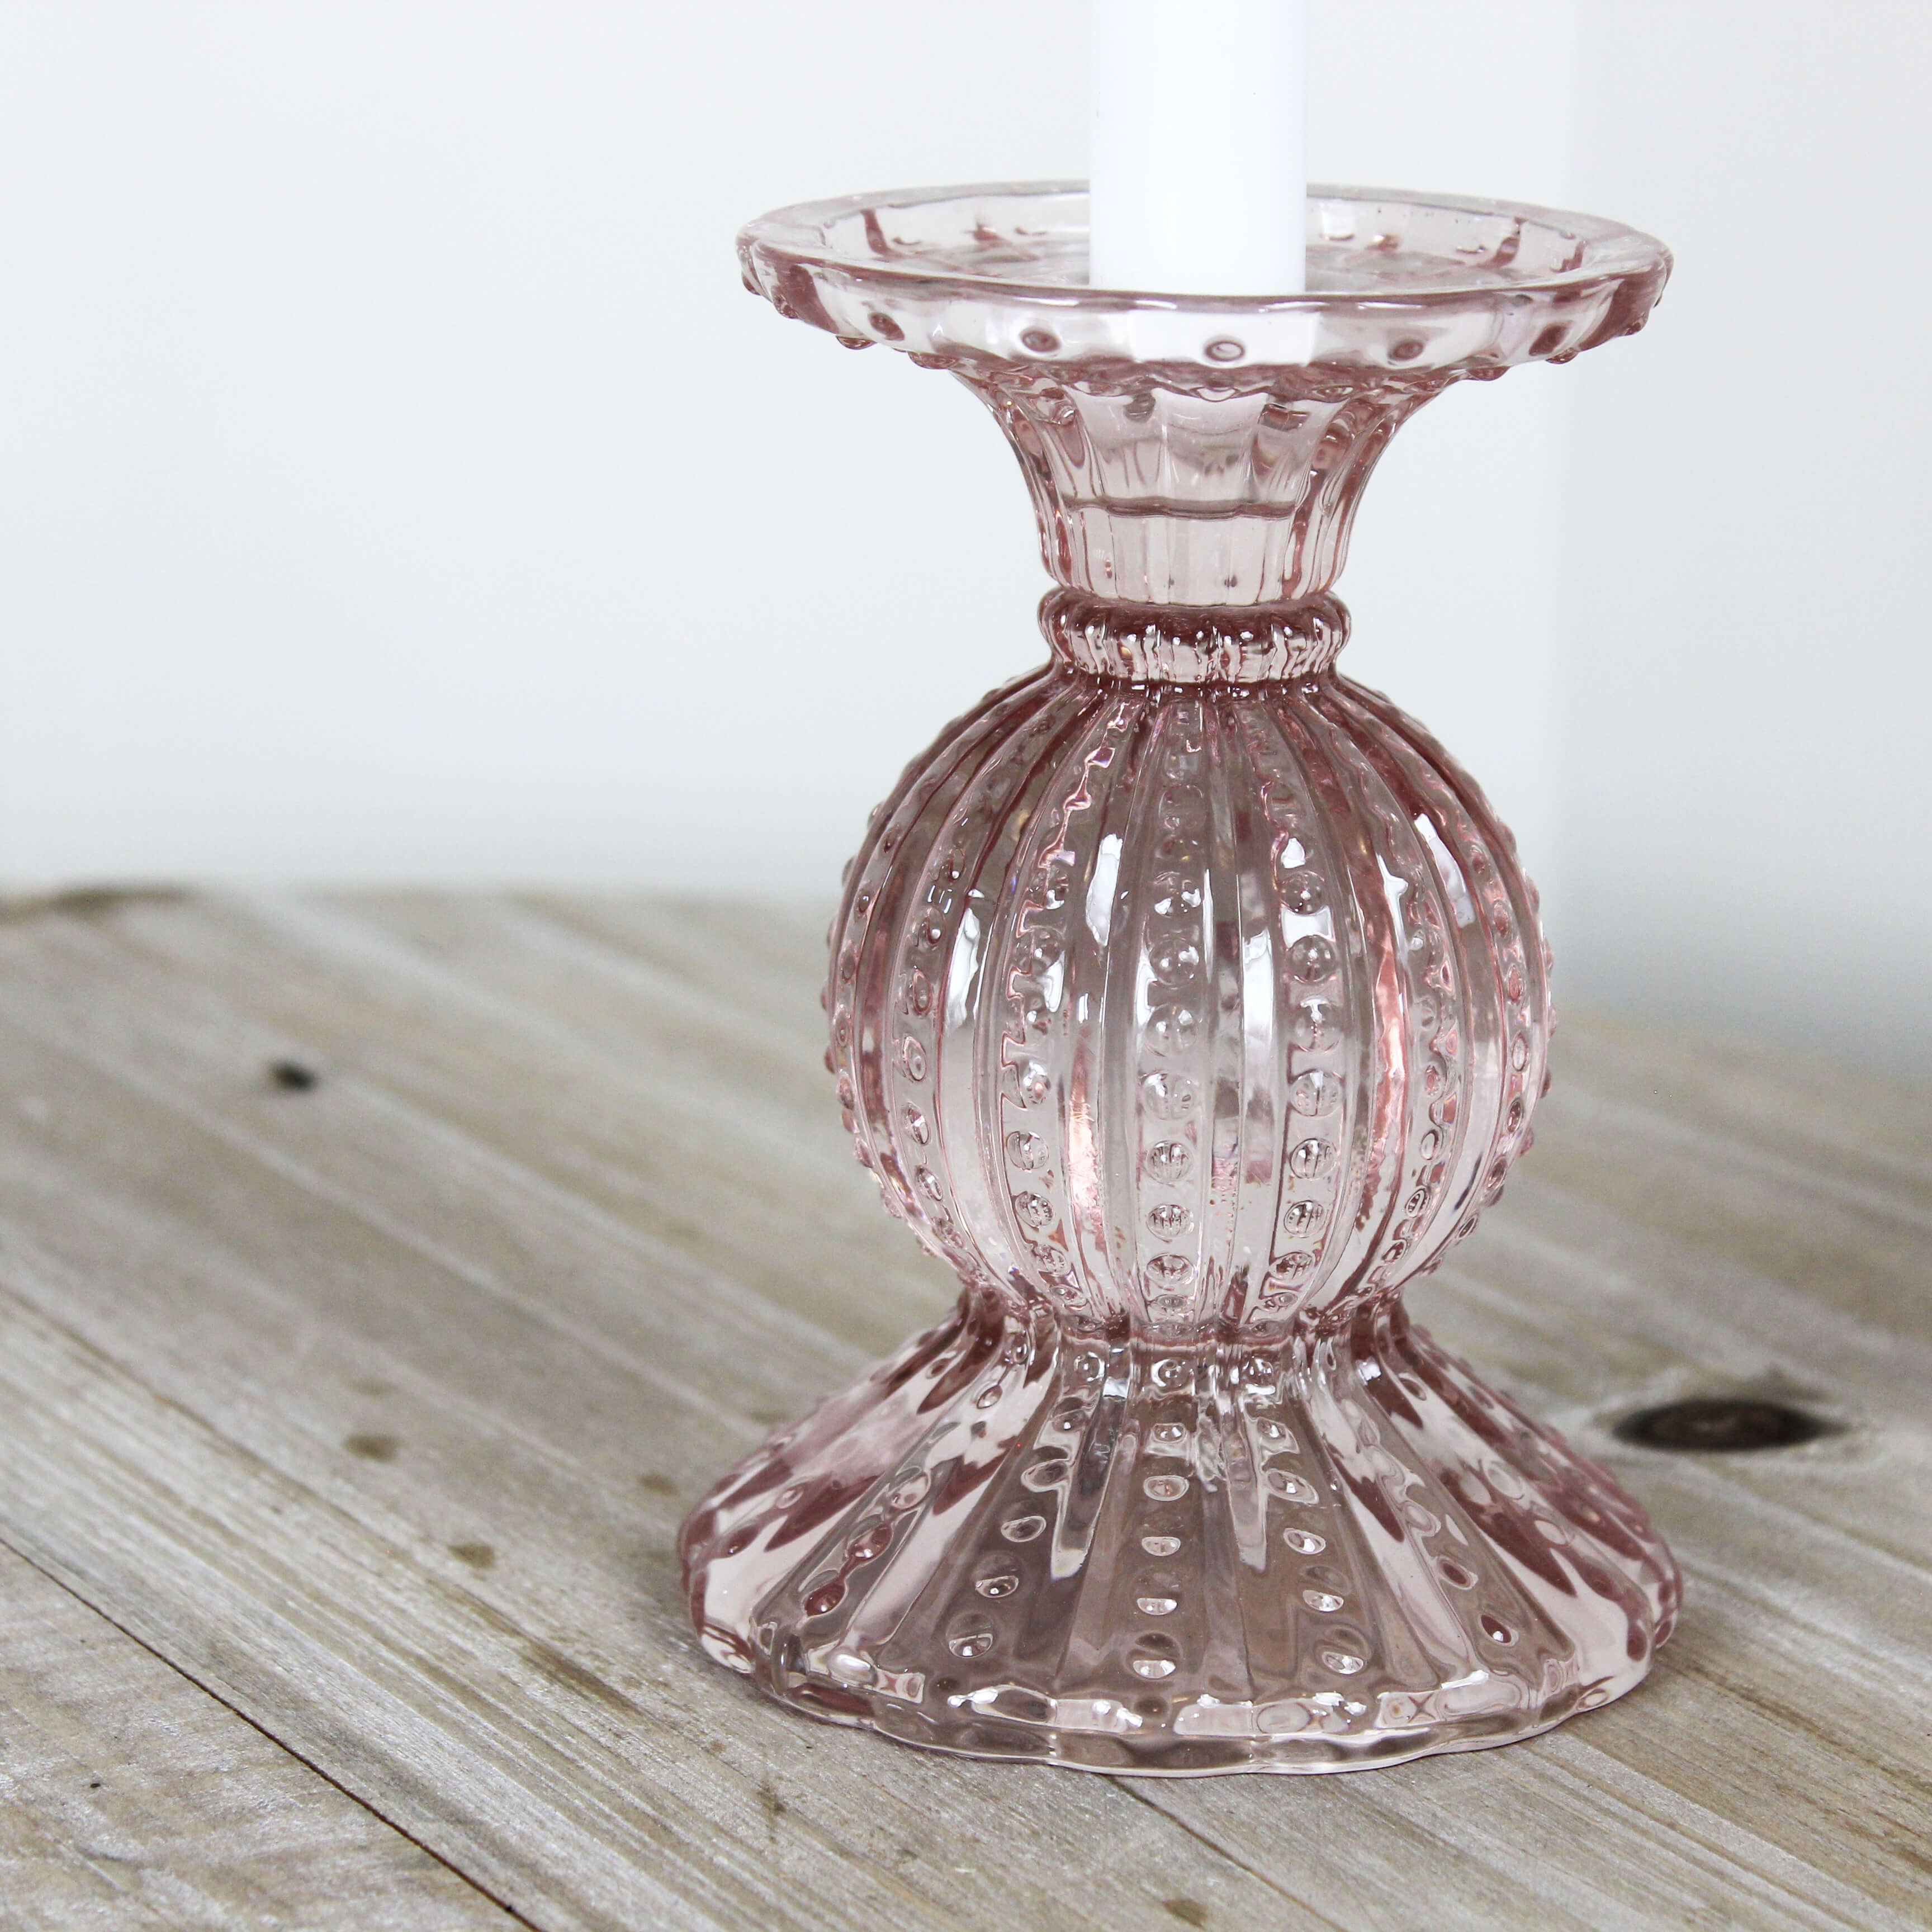 Pink Dimpled Glass Candle Holder